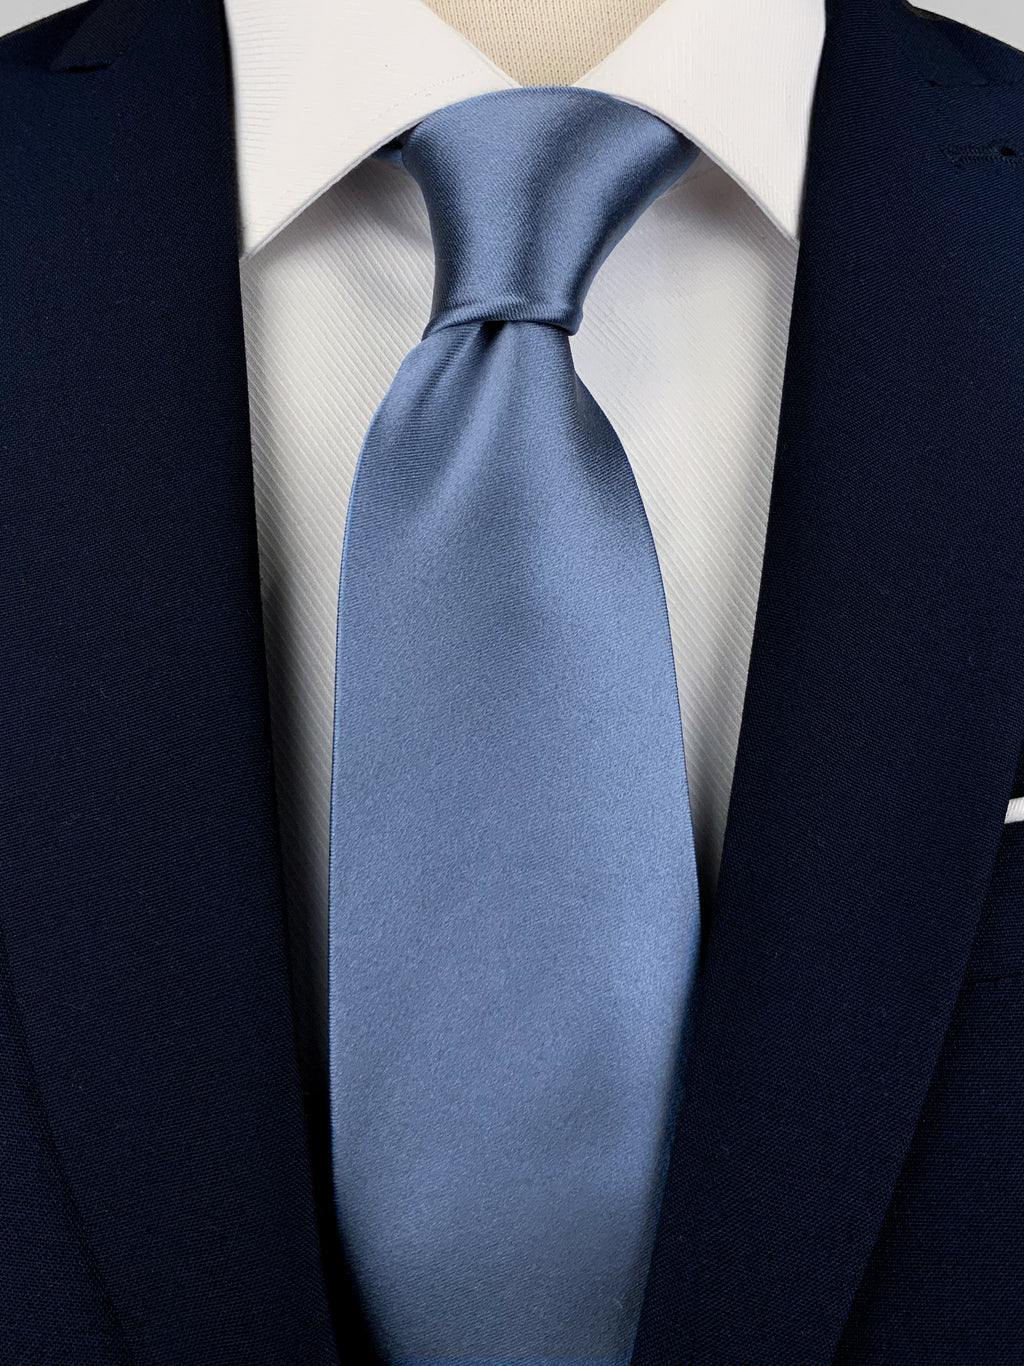 Steel blue mulberry silk satin tie worn with a white shirt and a navy blue suit